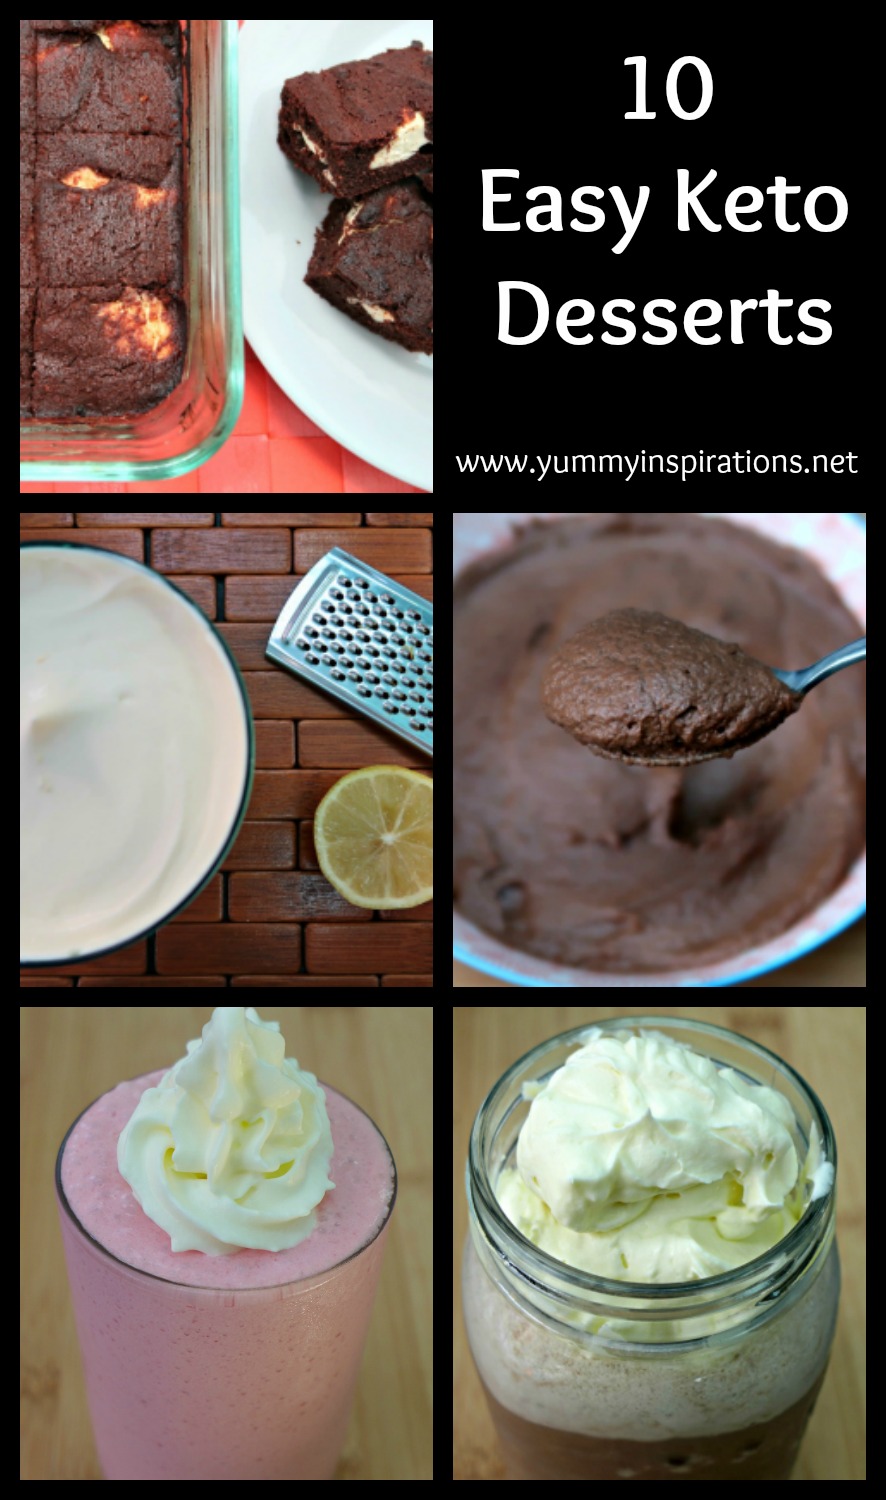 10 Easy Keto Desserts - Simple Ketogenic Dessert Recipes that allow you to still enjoy sweets like chocolate mousse, brownies, truffles, fat bombs and more!